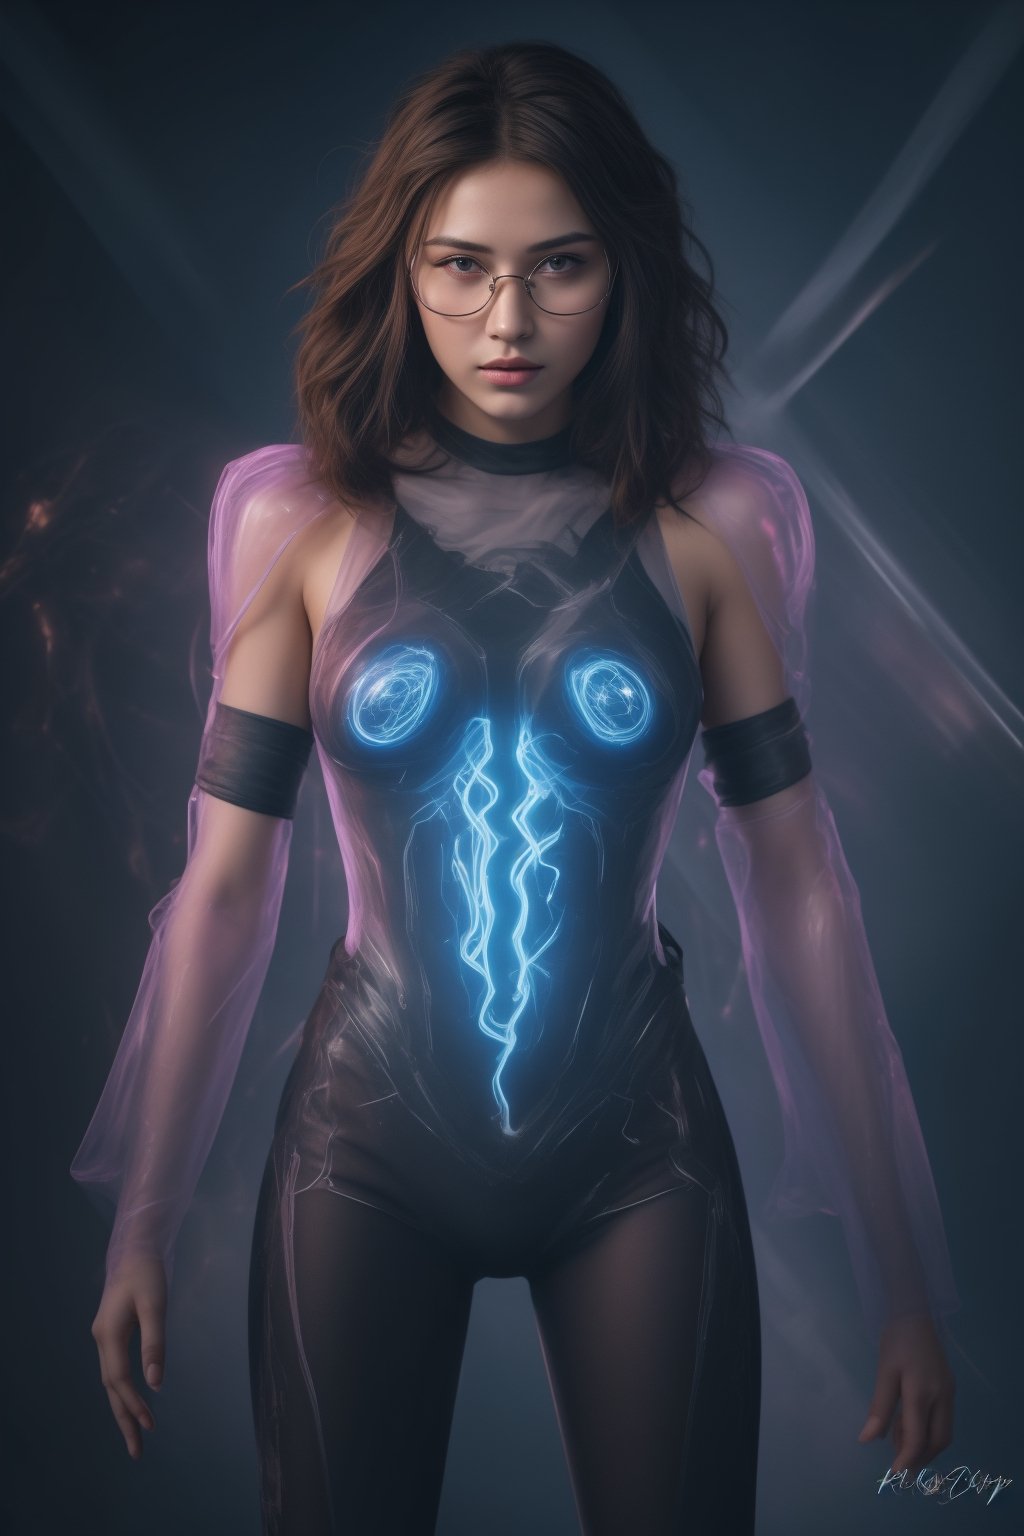 (best quality, 4k, 8k, highres, masterpiece:1.2), ultra-detailed, physically-based rendering, professional, vivid colors, bokeh, cyborg girl, made only glass, neon cables, gears, transparent body, mechanical details, glowing eyes, reflective surface, subtle reflections, ethereal, luminous, metallic highlights, sci-fi, futuristic, neon lights, blue and purple color palette, dynamic lighting,Mallu girl,photo r3al,Brown tone Beauty,cyberpunk glasses